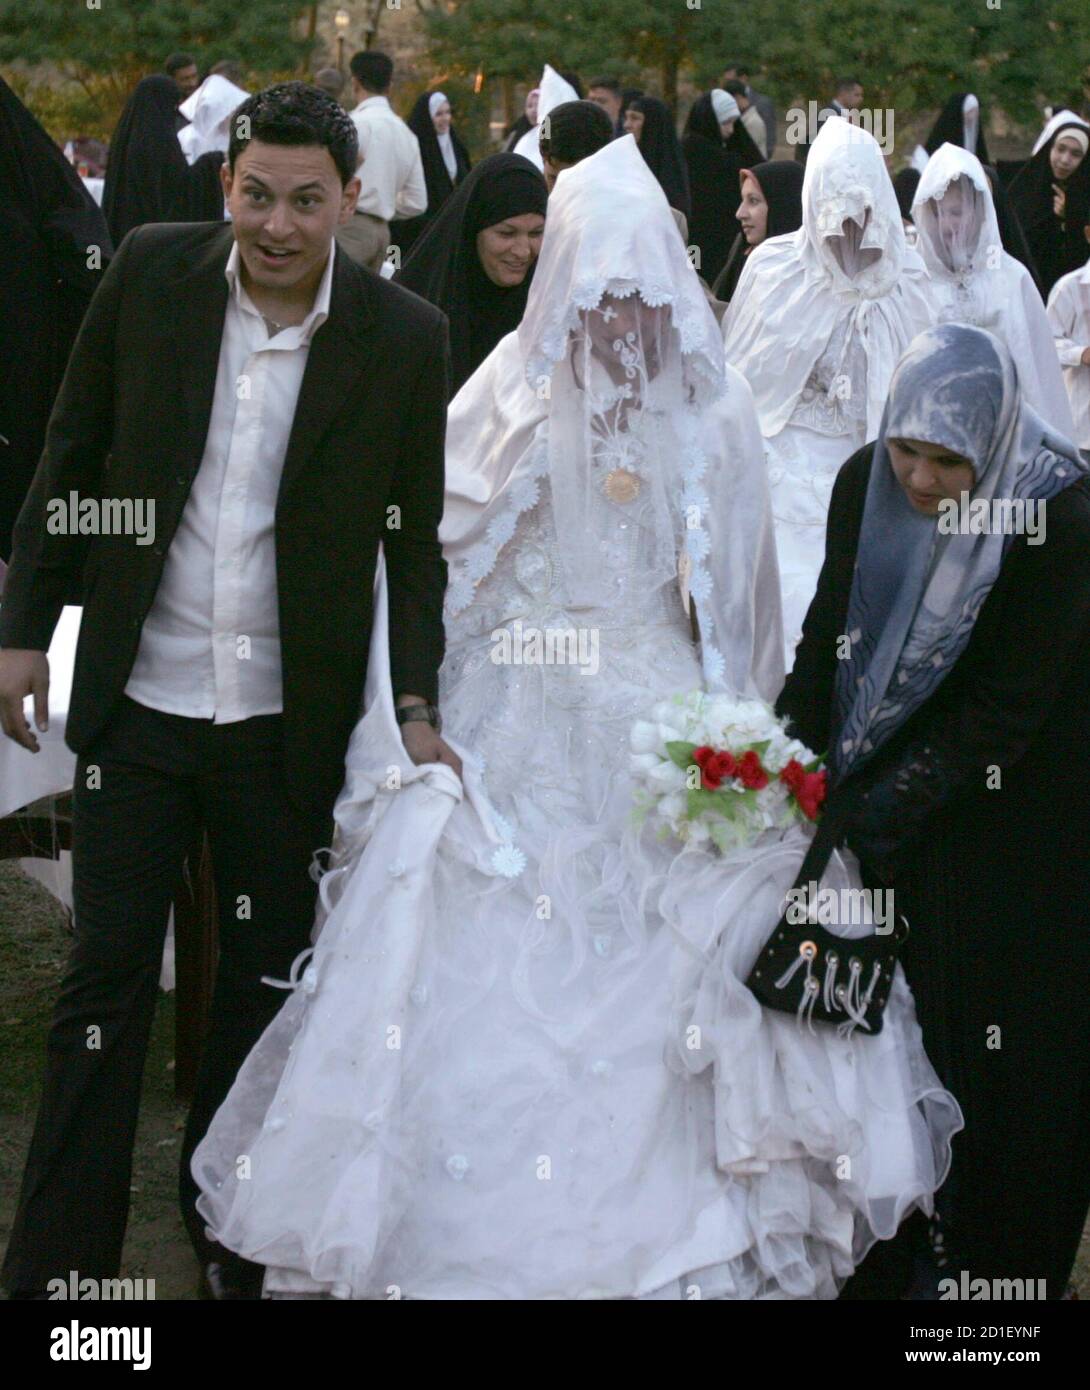 Iraqi brides and grooms arrive to attend a mass wedding ceremony involving 200 couples organized by the local government in Hilla, 100 km (62 miles) south of Baghdad December 1, 2008. Picture taken December 1, 2008. REUTERS/Mushtaq Muhammed (IRAQ) Stock Photo